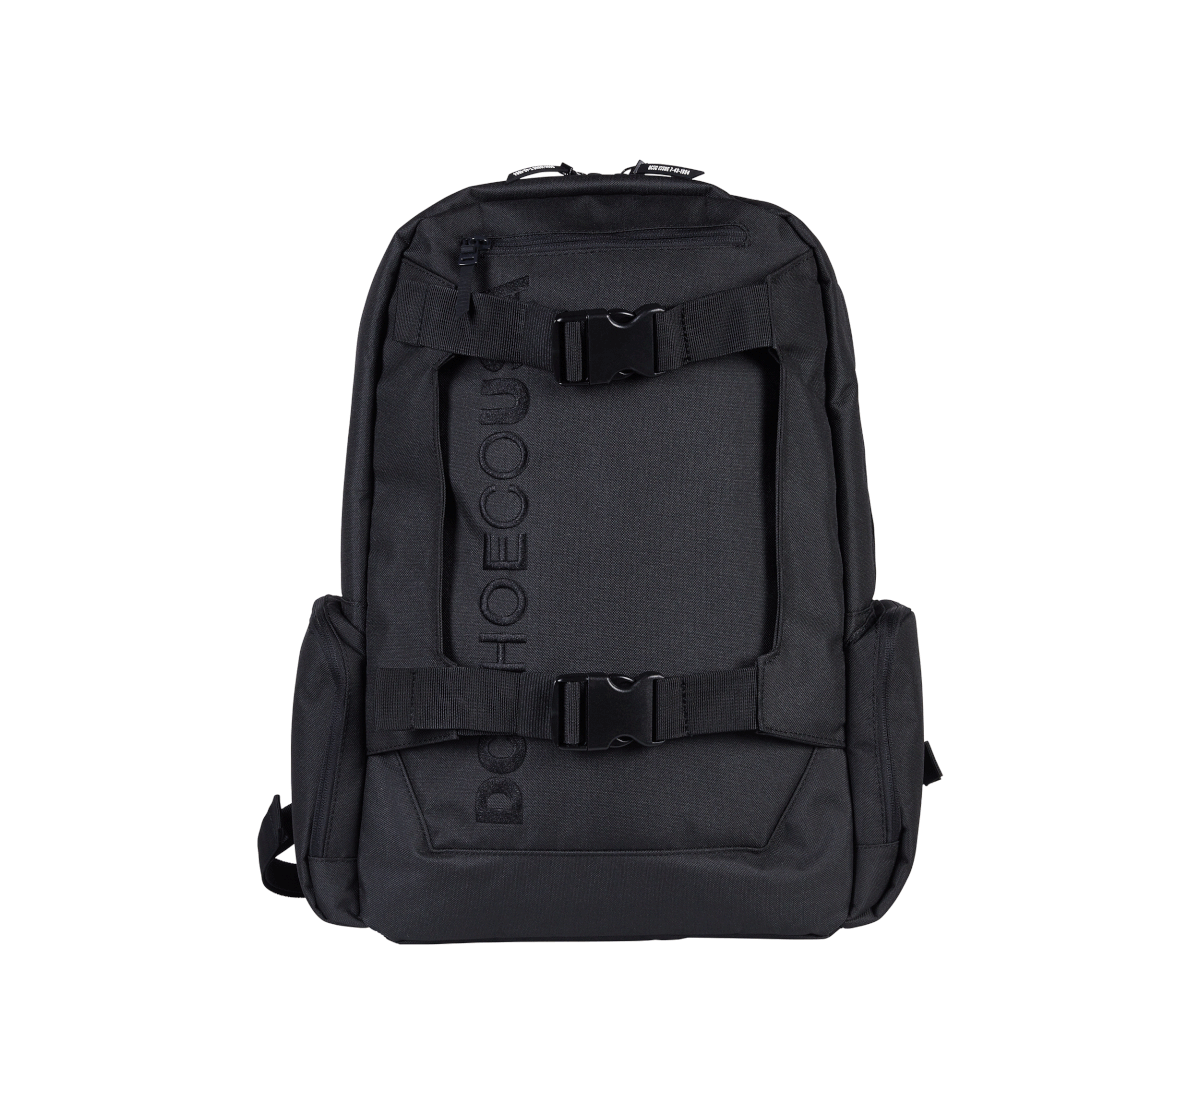 a black colored backpack